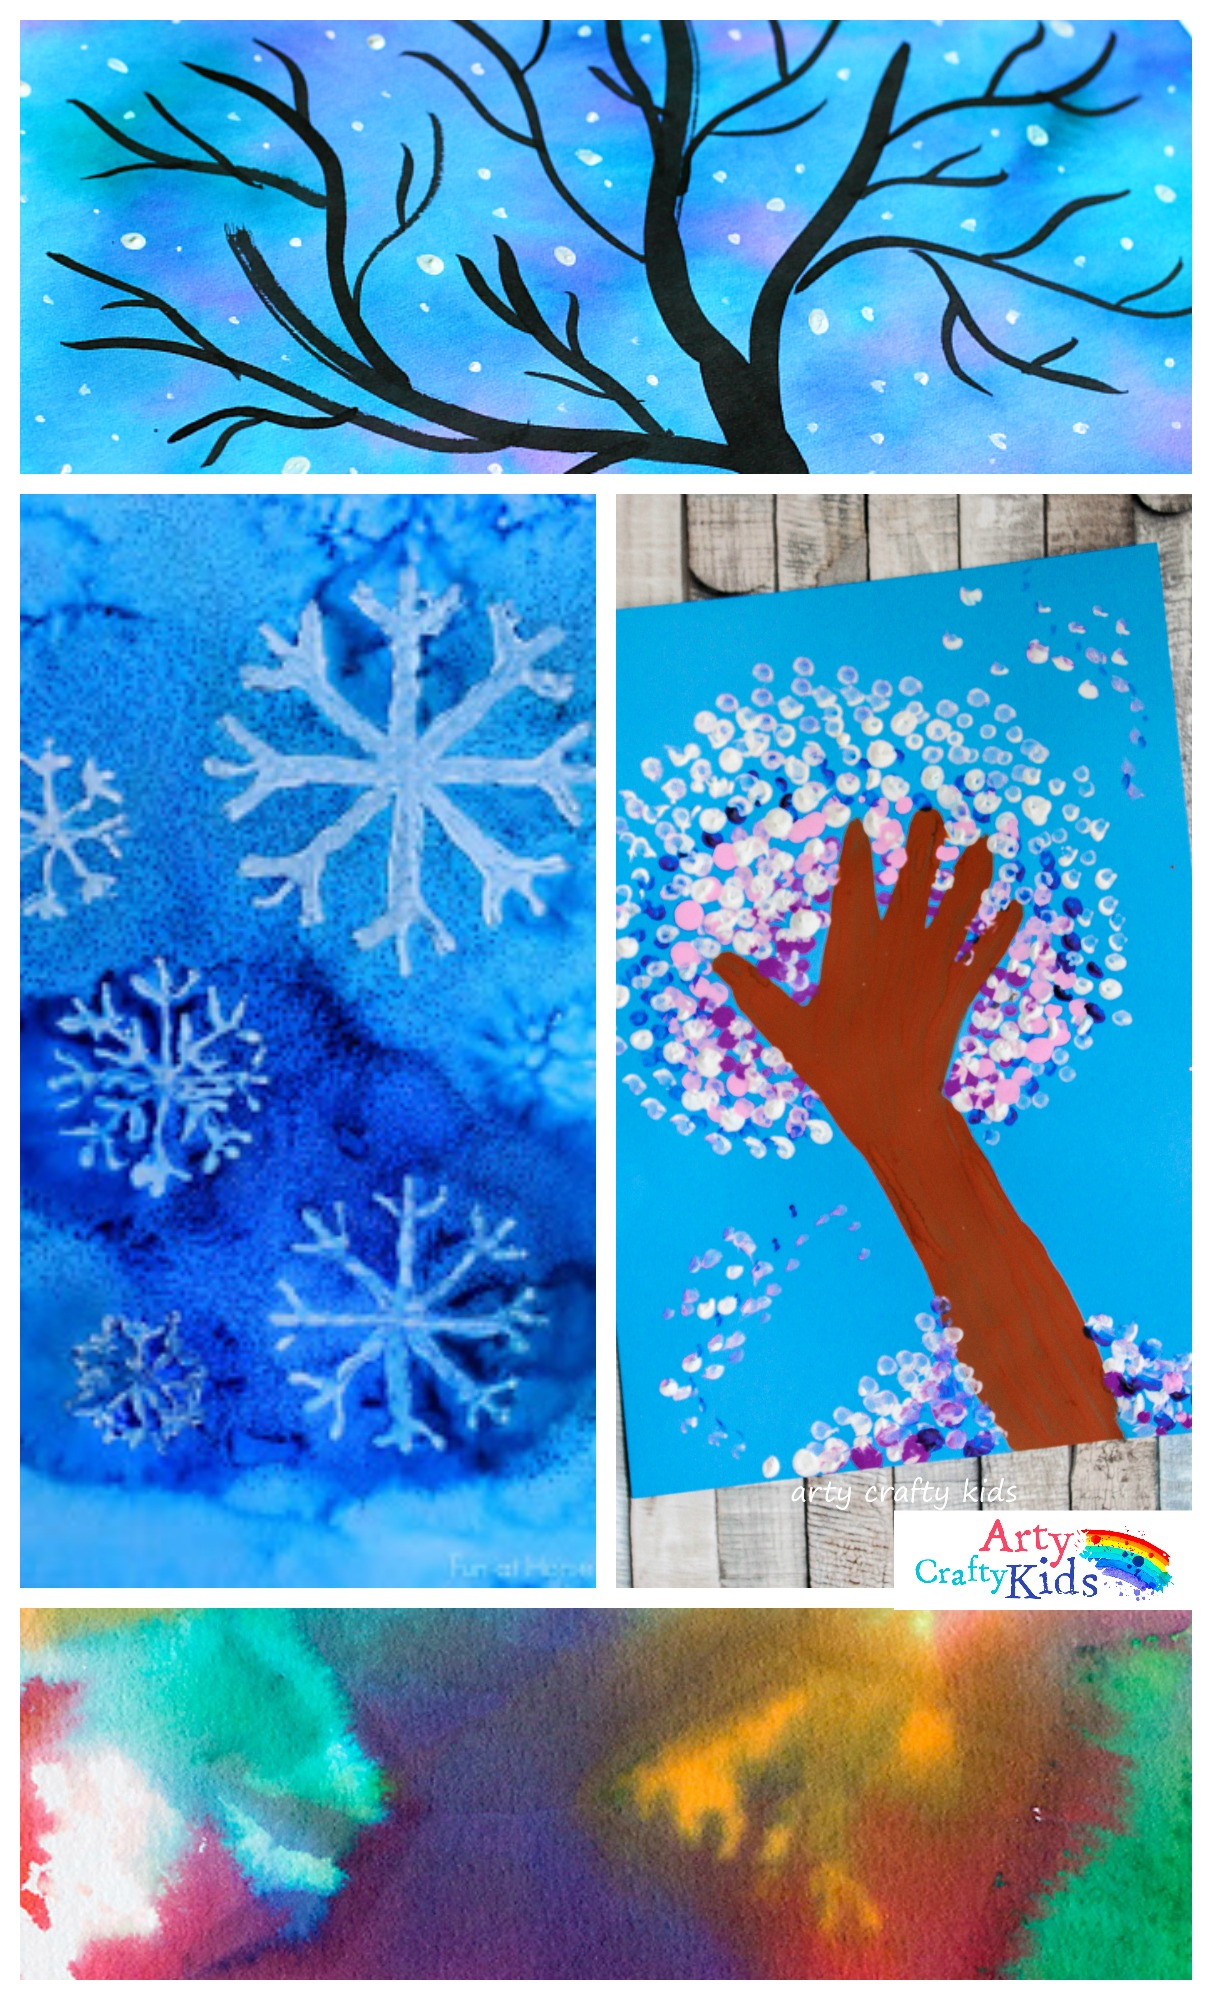 Craft Projects For Toddlers
 14 Wonderful Winter Art Projects for Kids Arty Crafty Kids